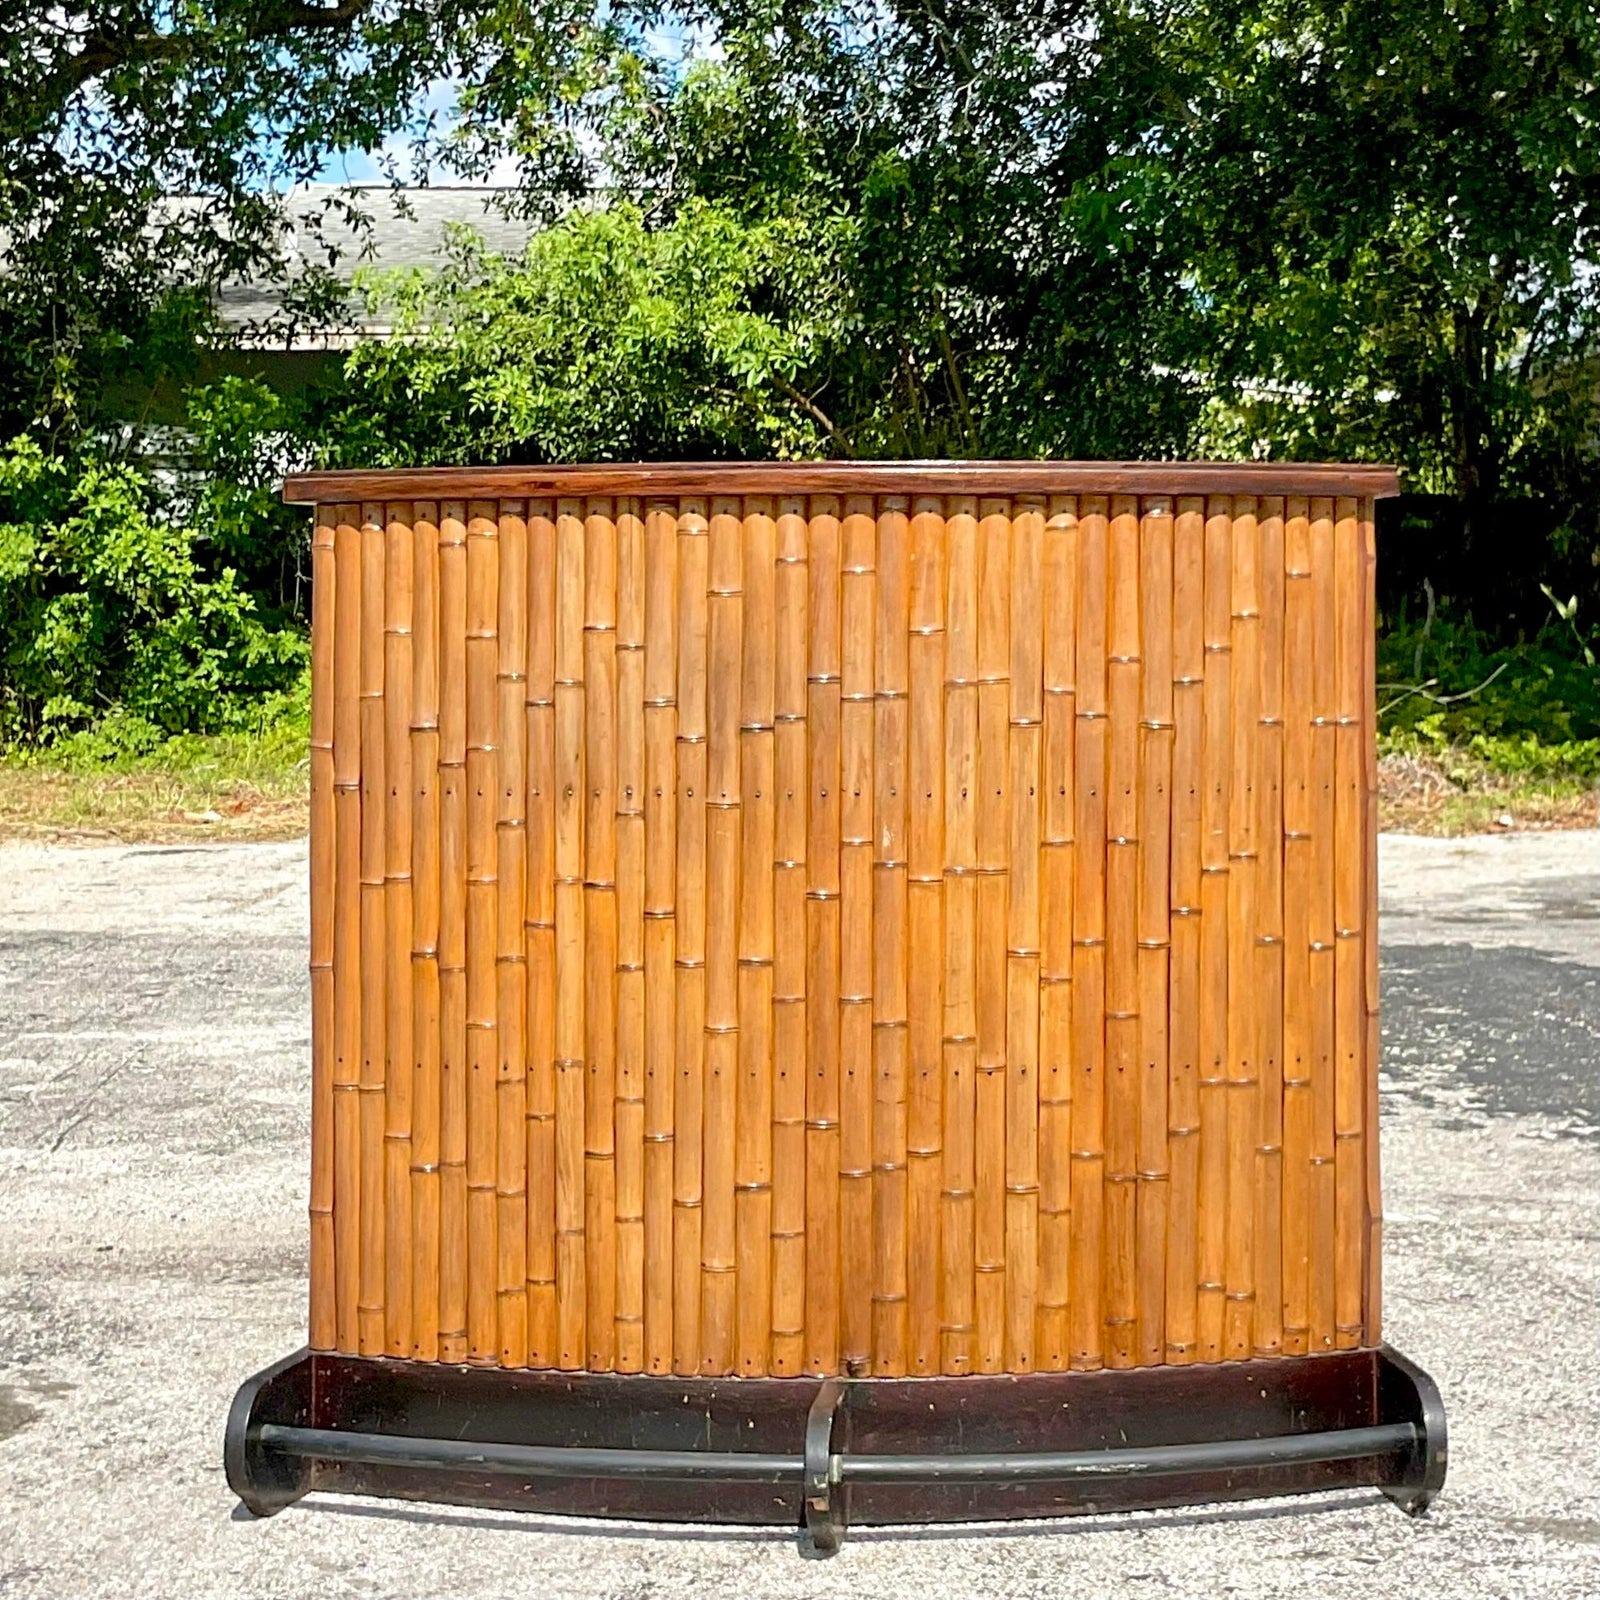 A fabulous vintage Coastal tiki bar. A real Midcentury gem with lots of great storage behind. Black laminate top for extra efficiency. Acquired from a Palm Beach estate.